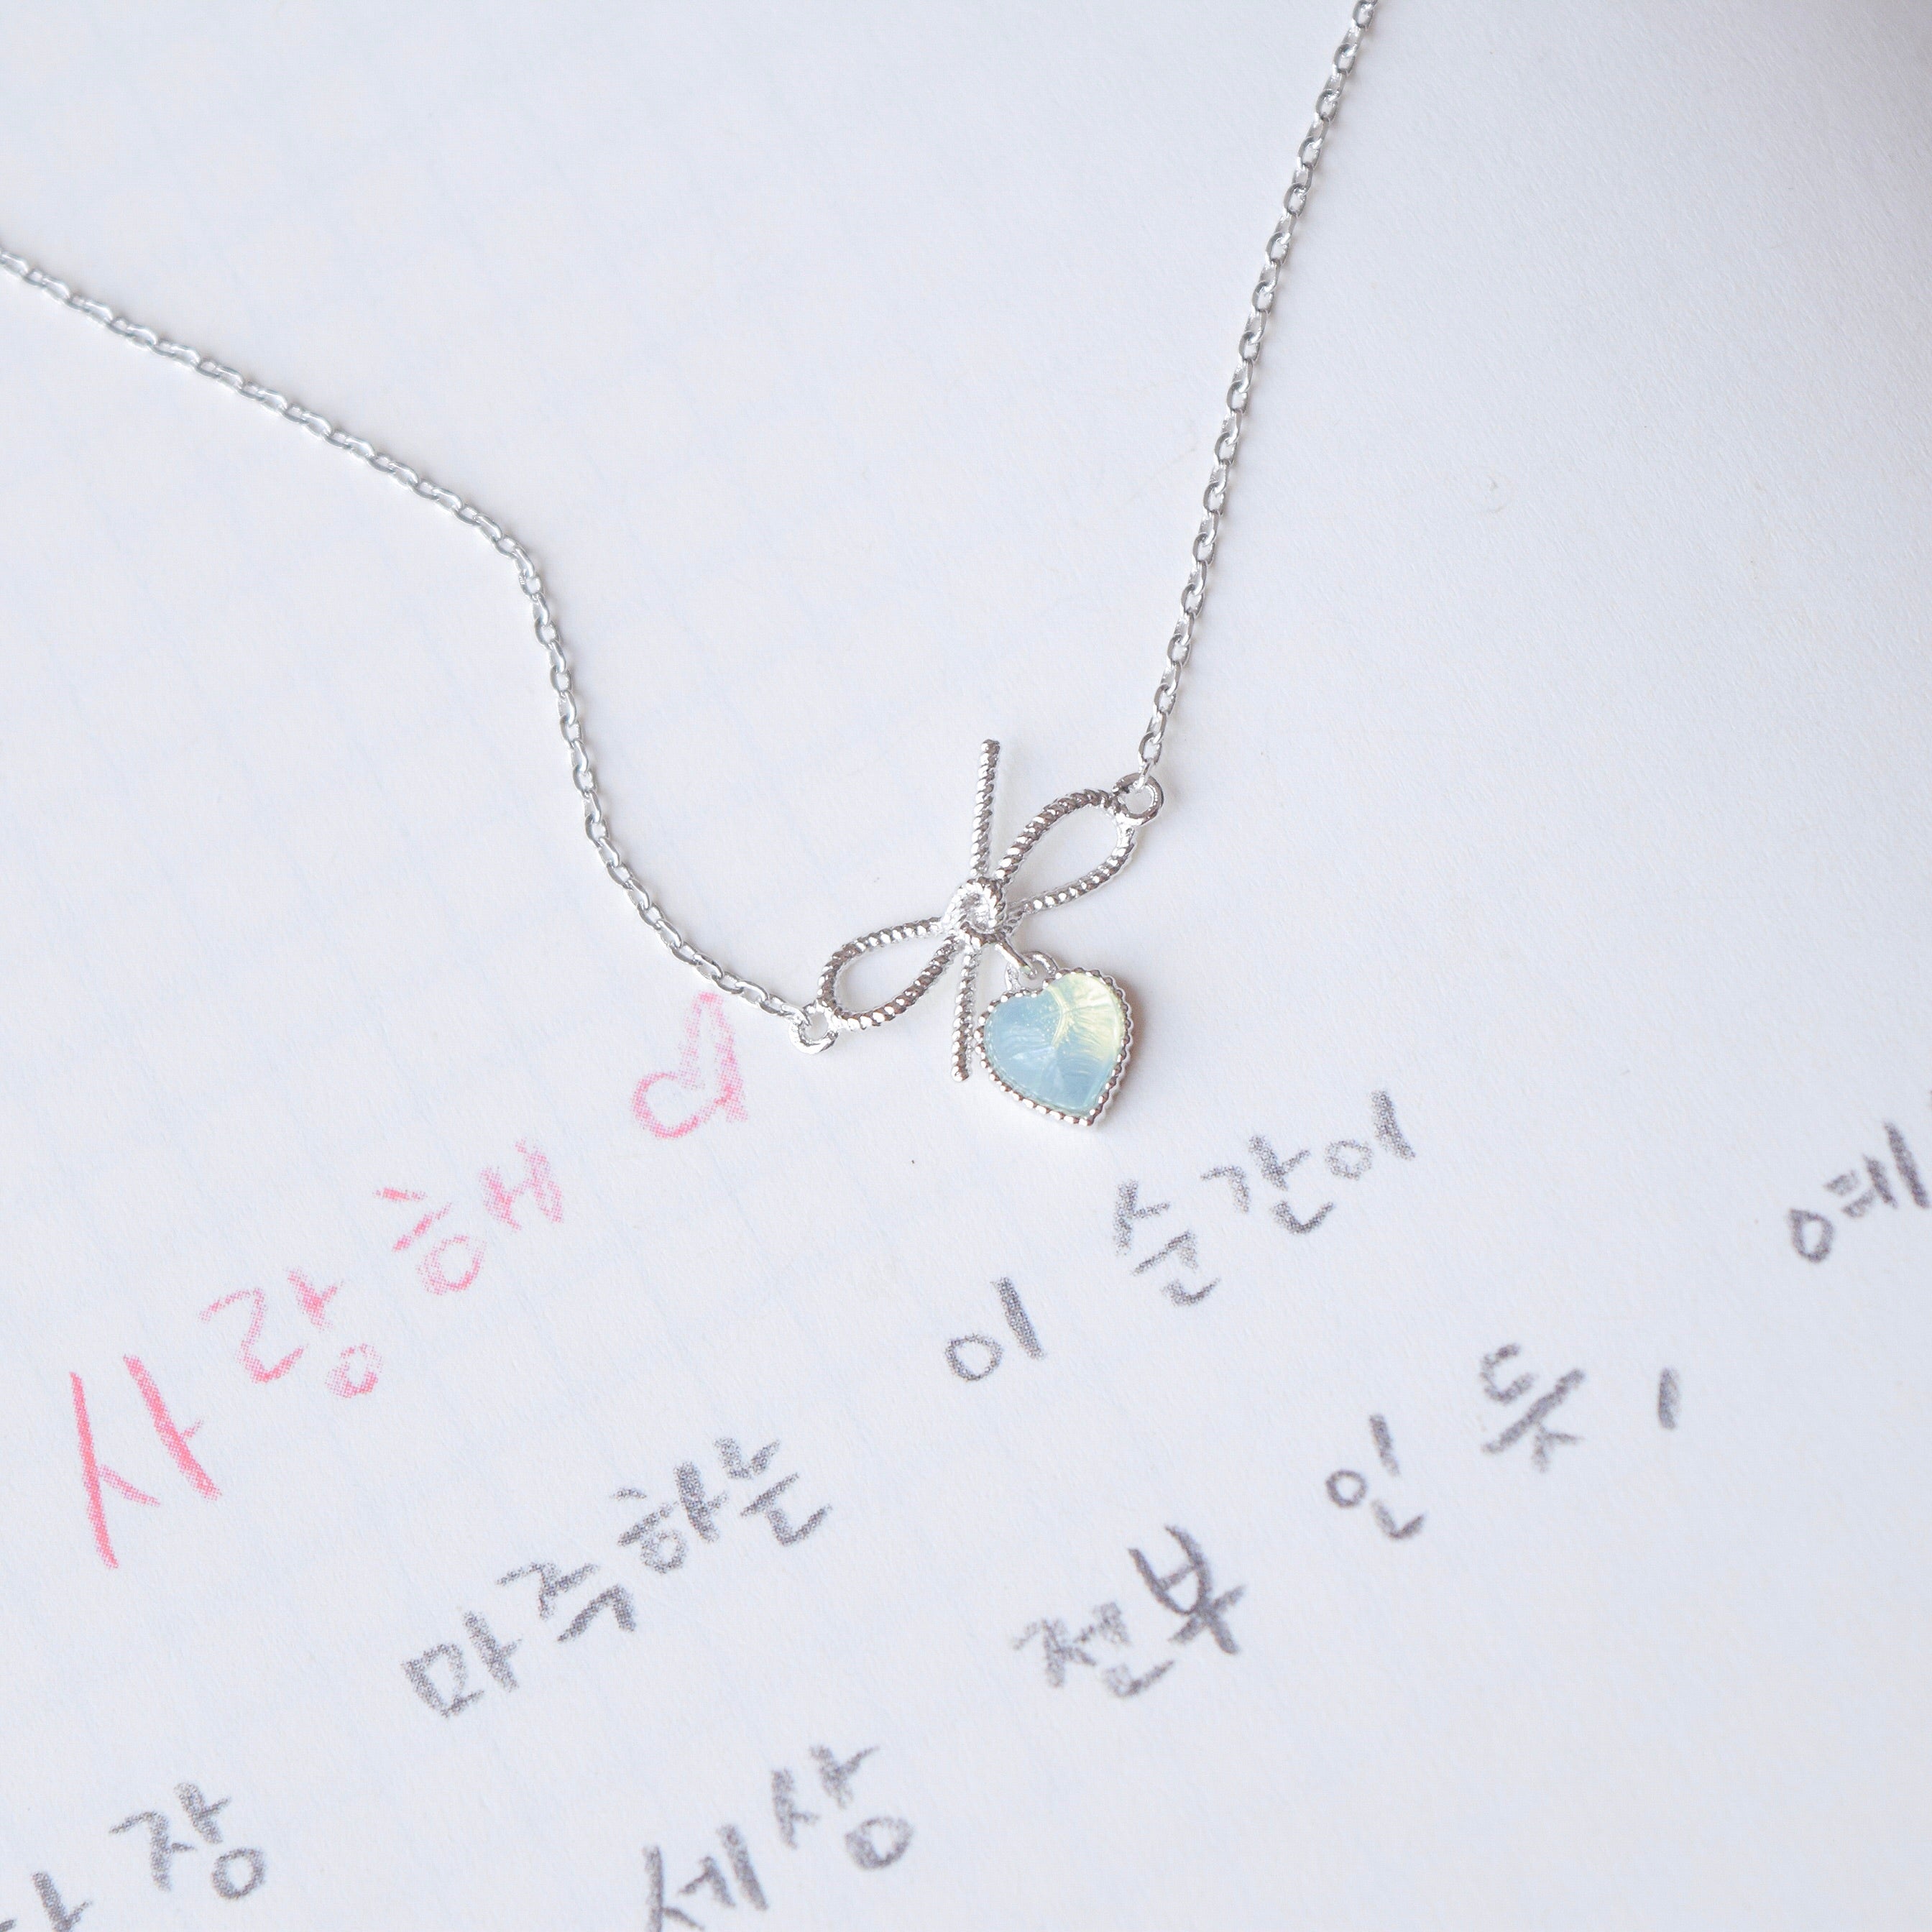 Silver Made in Korea Necklace Korean Rantai Leher Cubic Zirconia Bride Bridal Dinner Rhodium Plated Accessory Fashion Fancy Stylish Jewellery Online Malaysia Shopping Trendy Accessories Daily Wear Jewelry Dainty Minimalist Delicate Special Perfect Gift From Heart For Your Loved One